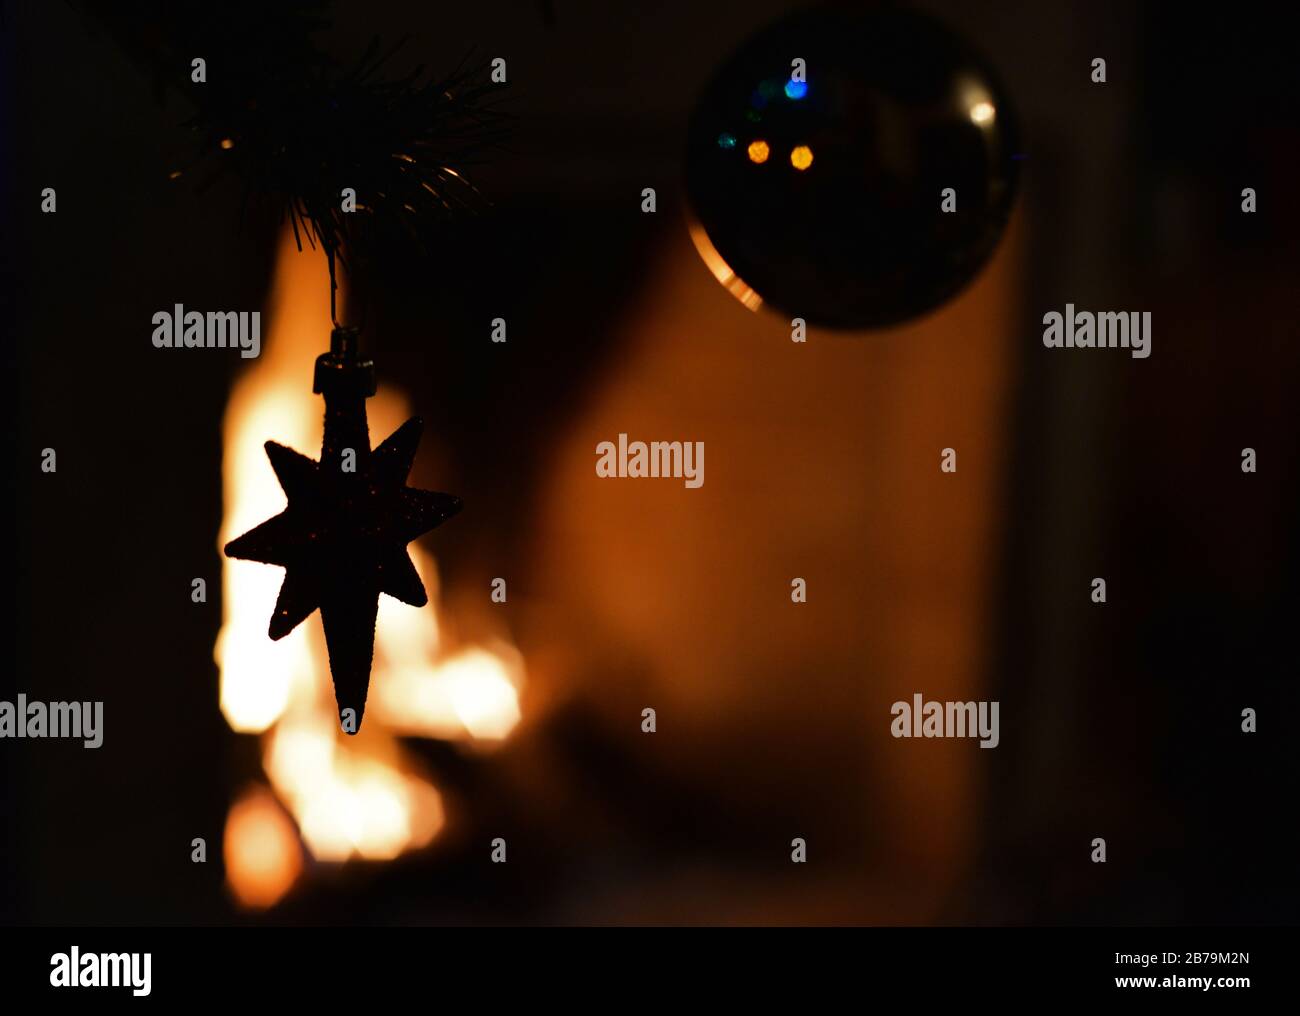 Decorative star hanging from a Christmas tree against the illumination of a fireplace. Concept: festive season. Stock Photo